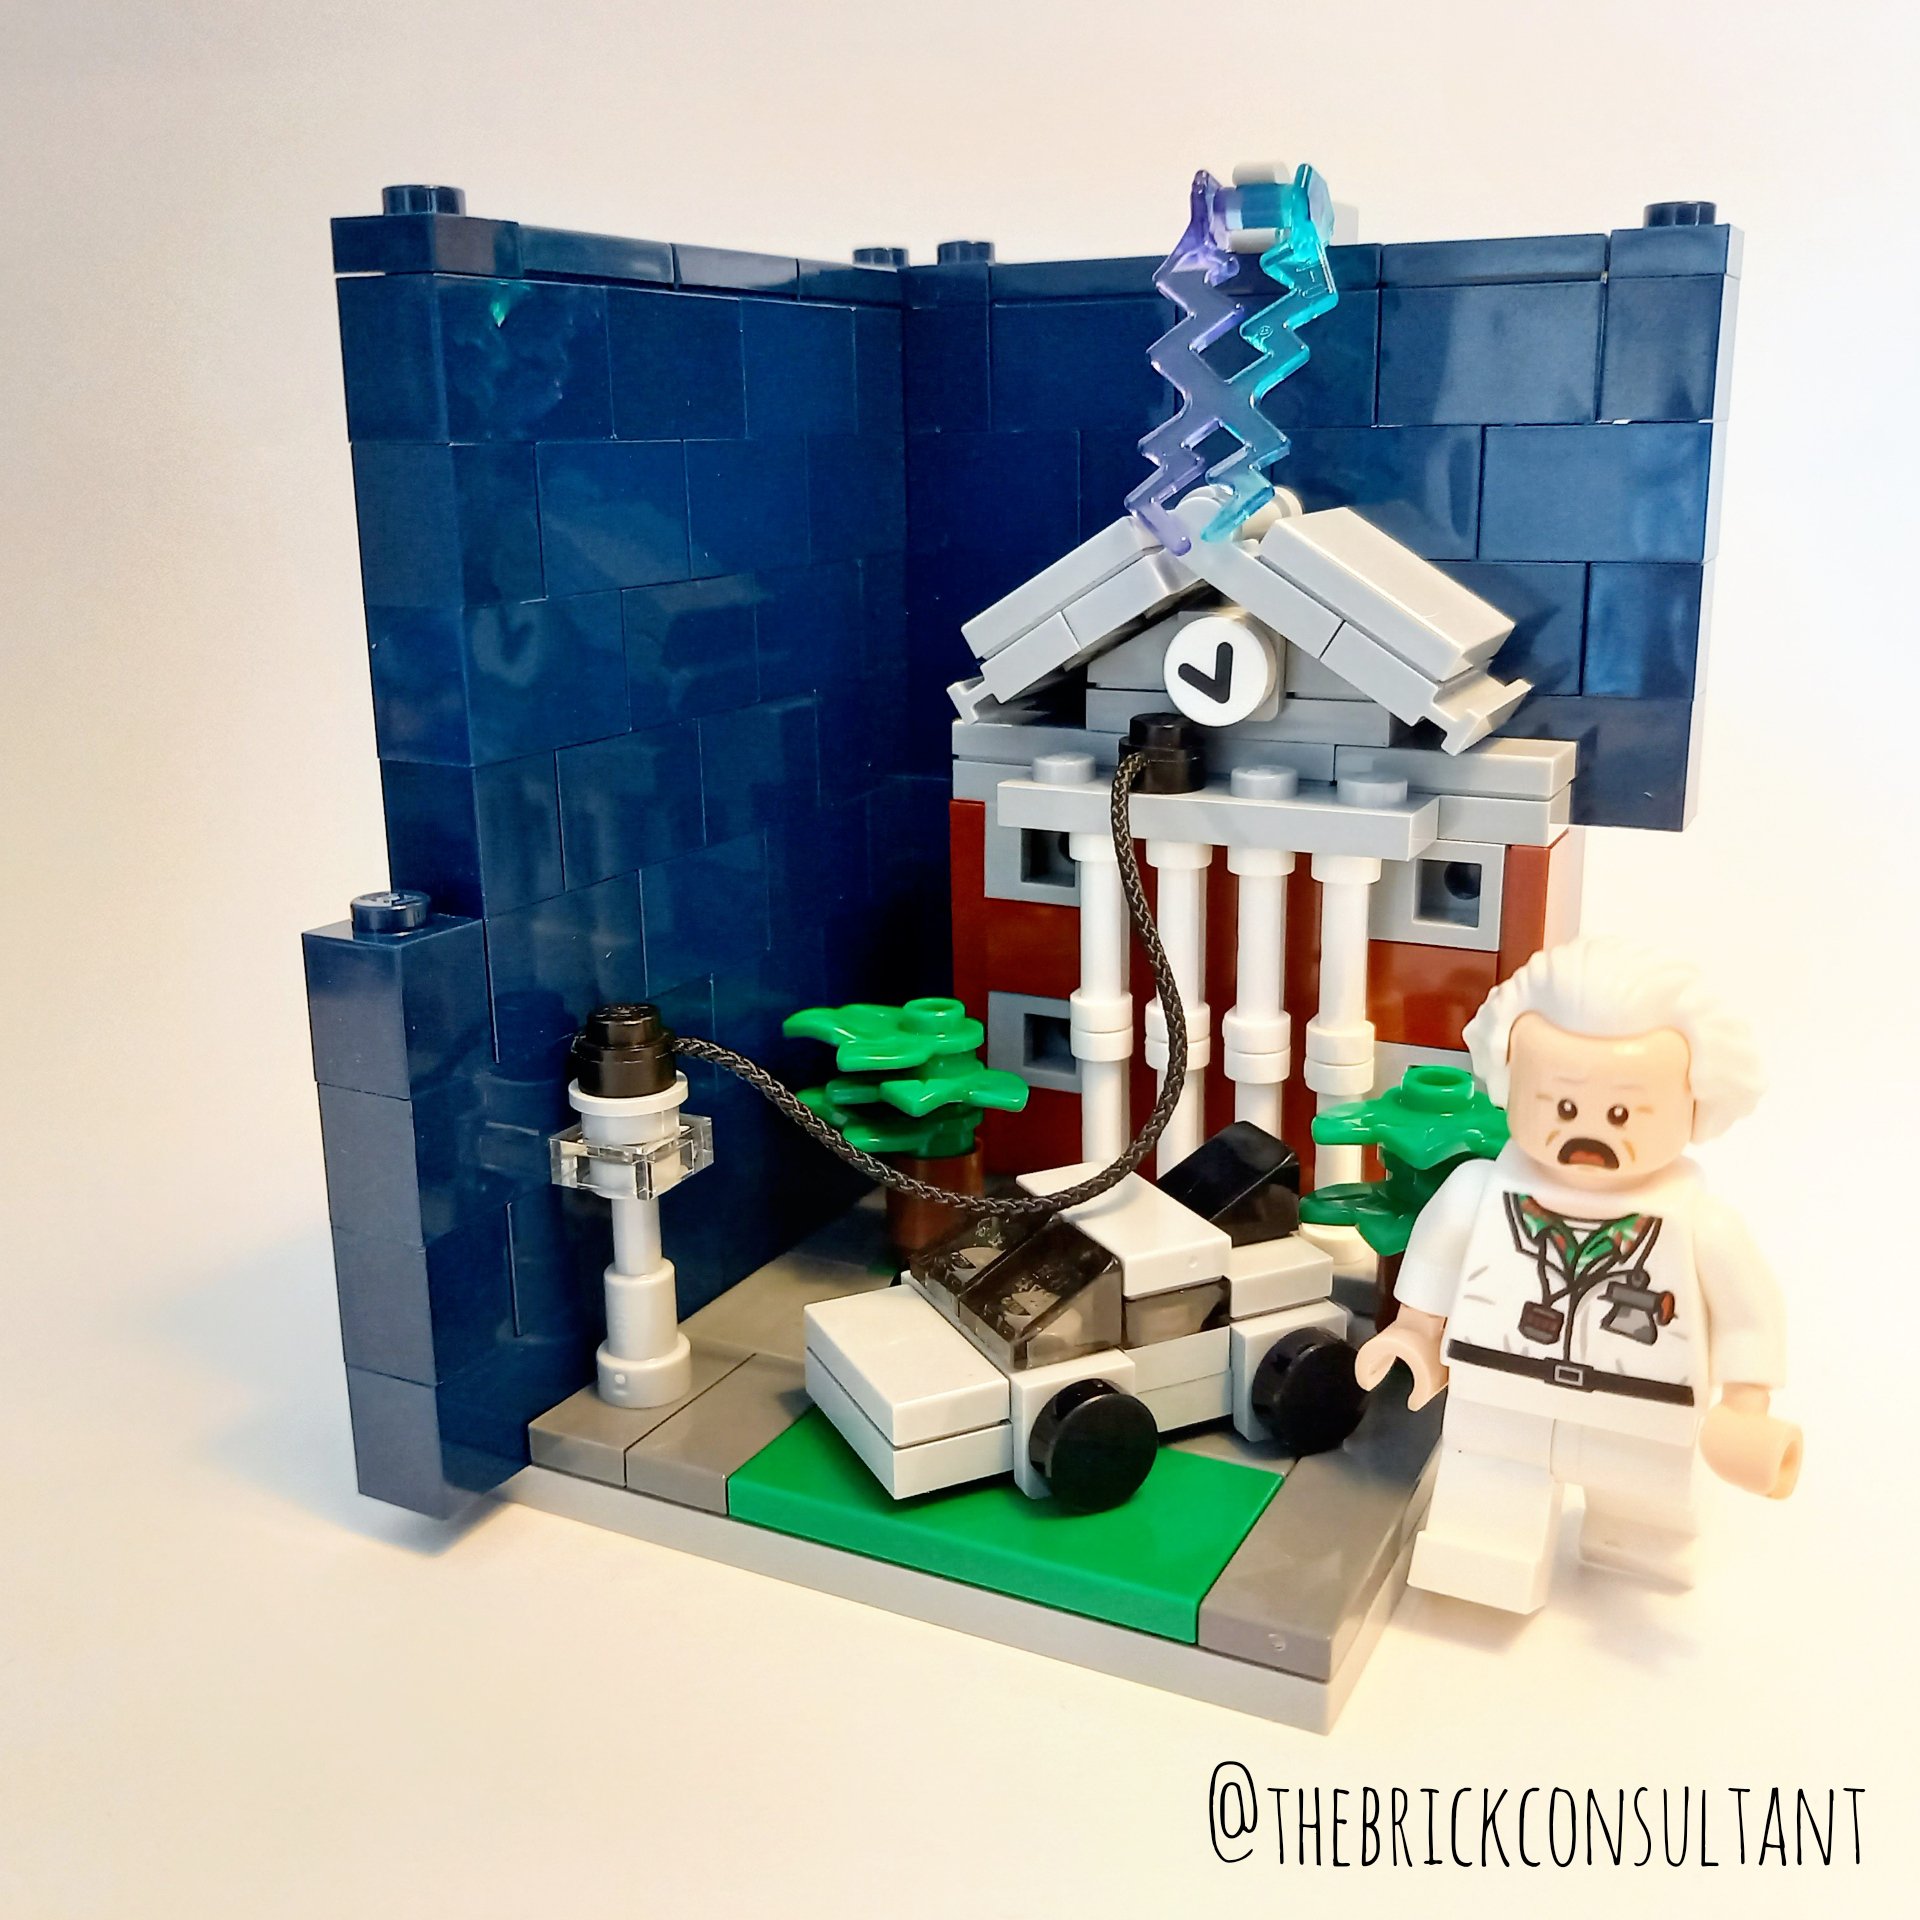 on Twitter: "LEGO Dimensions habitats: I made a mini Back to the Future scene for my Doc Brown minifigure #LEGO #minifigure #minifigurehabitats #legodimensions #legophotograph #backtothefuture #clocktower #docbrown #delorean https ...